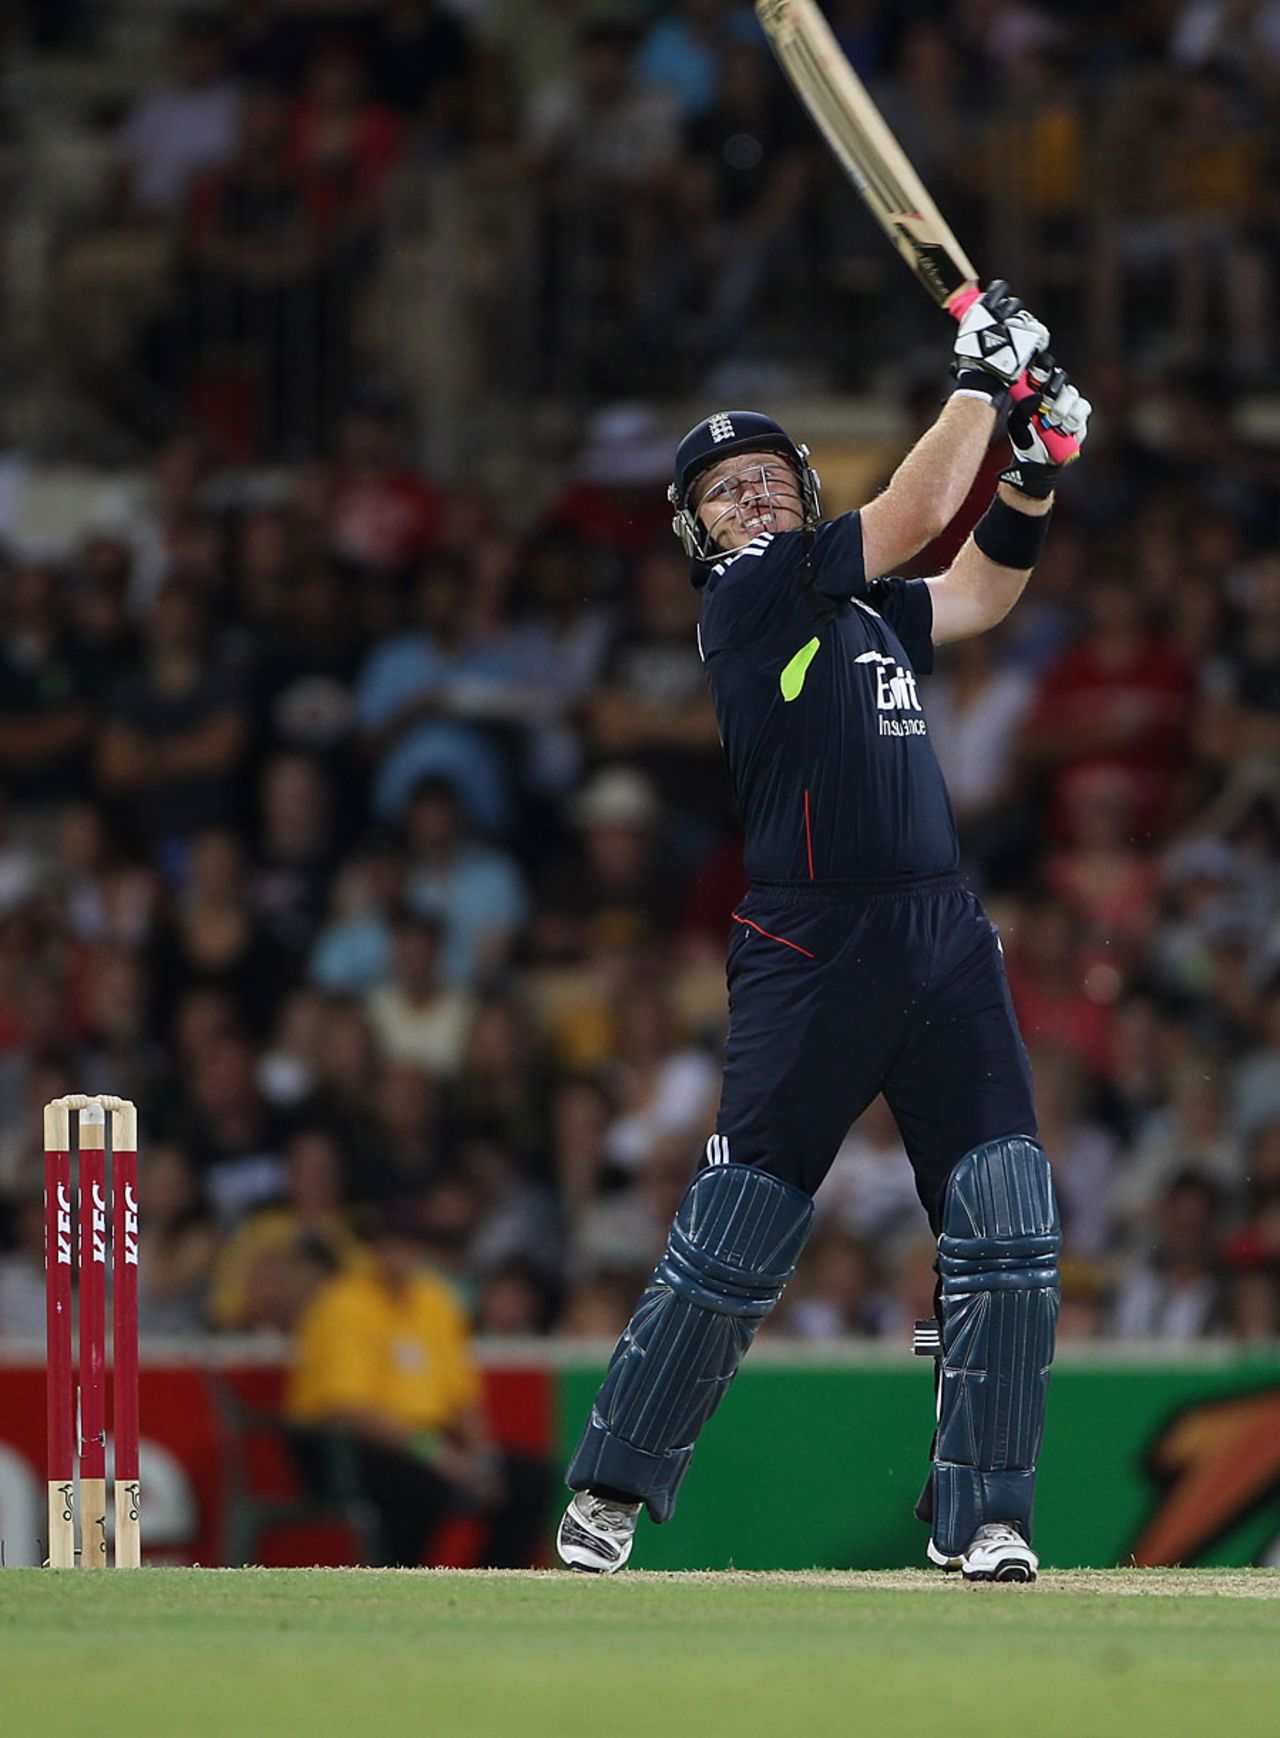 Ian Bell was in expansive mood at the top of the order, Australia v England, 1st Twenty20, Adelaide, January 12, 2011